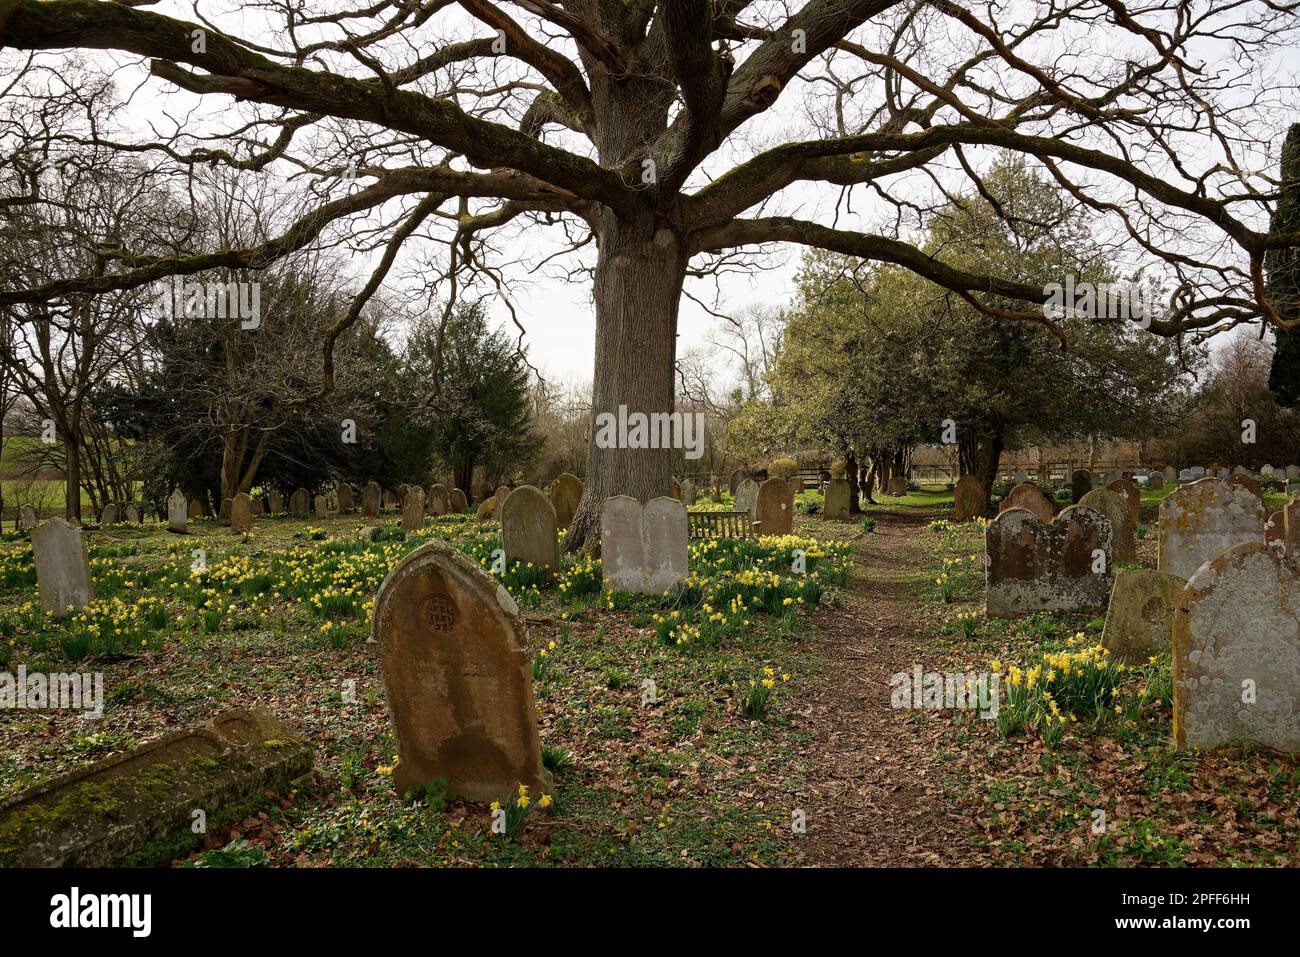 Daffodils in a graveyard. Tombstones and spring flowers. An English churchyard with daffodils in flower. Stock Photo